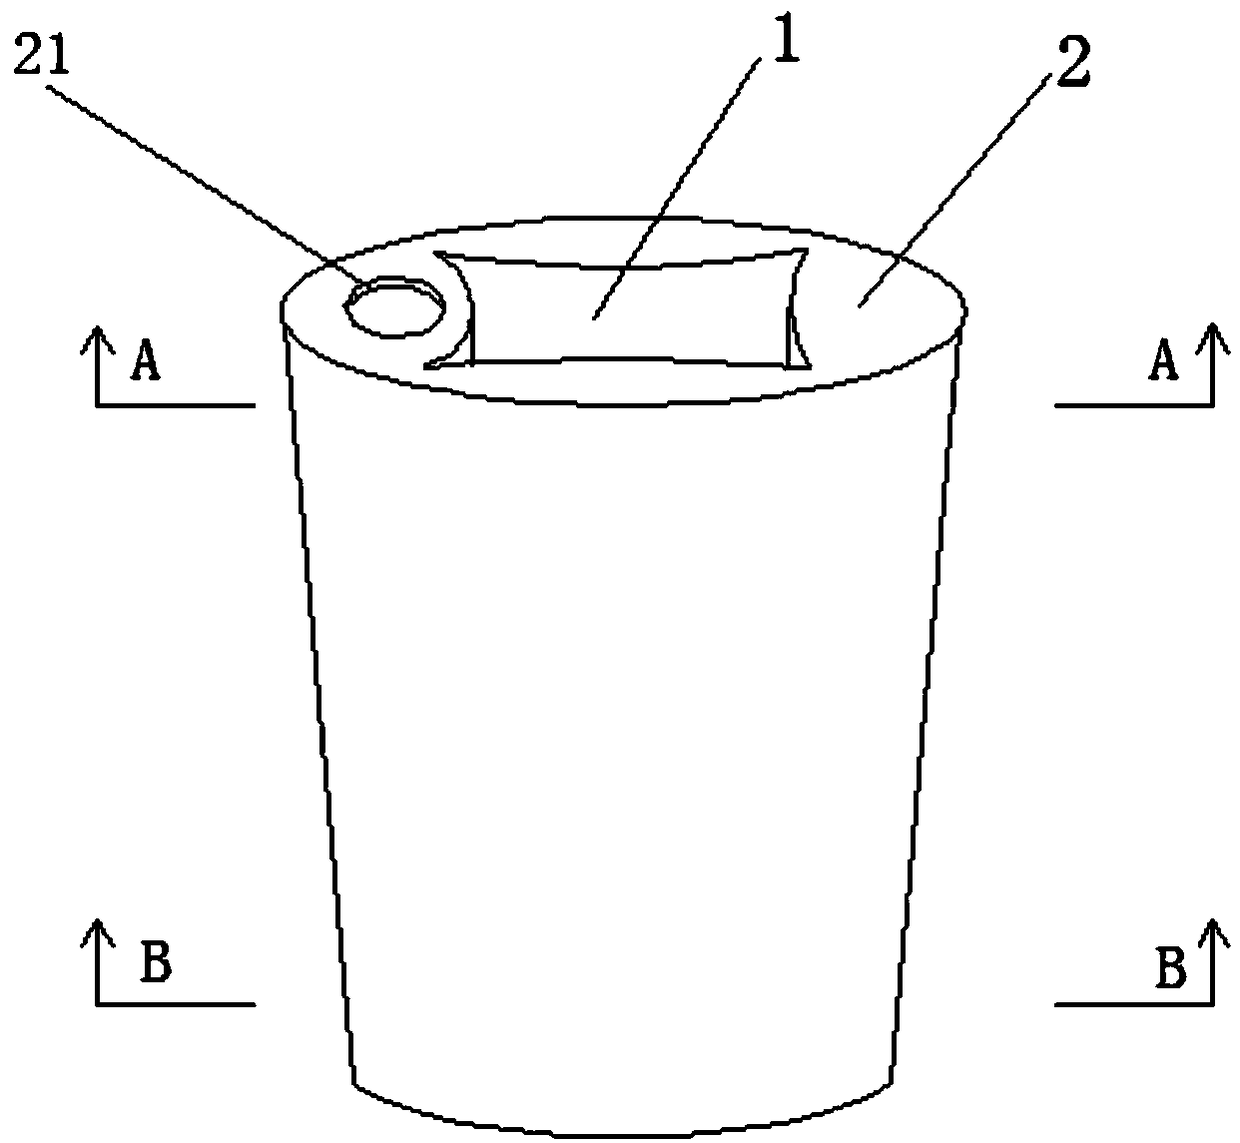 A planting container with a water storage cavity and its permeation irrigation method